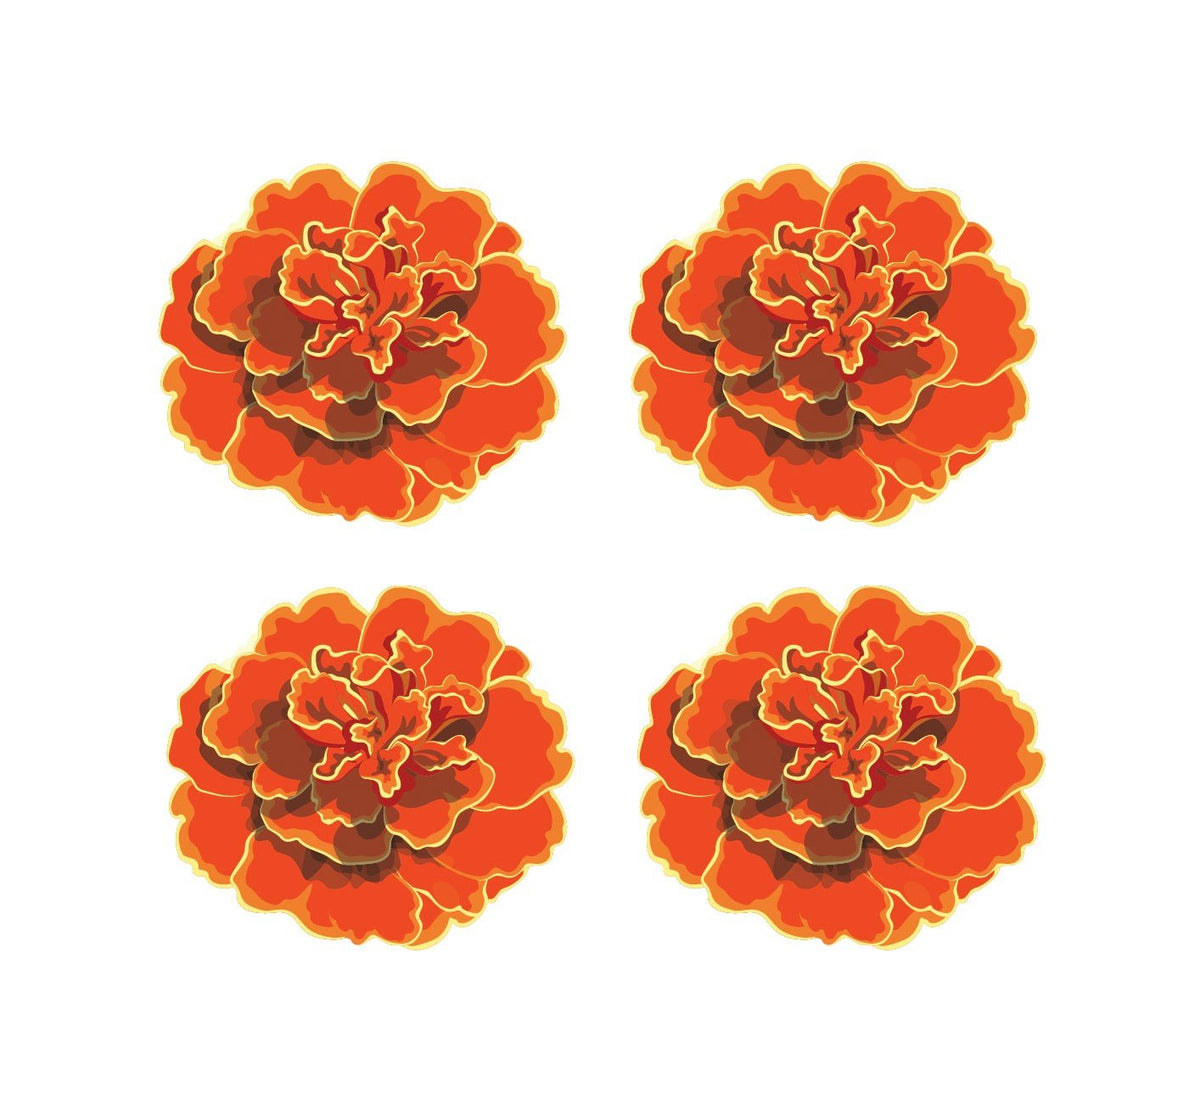 Four identical illustrations of Day of the Dead Marigolds flowers in different colors on a white background by Cover-Alls.